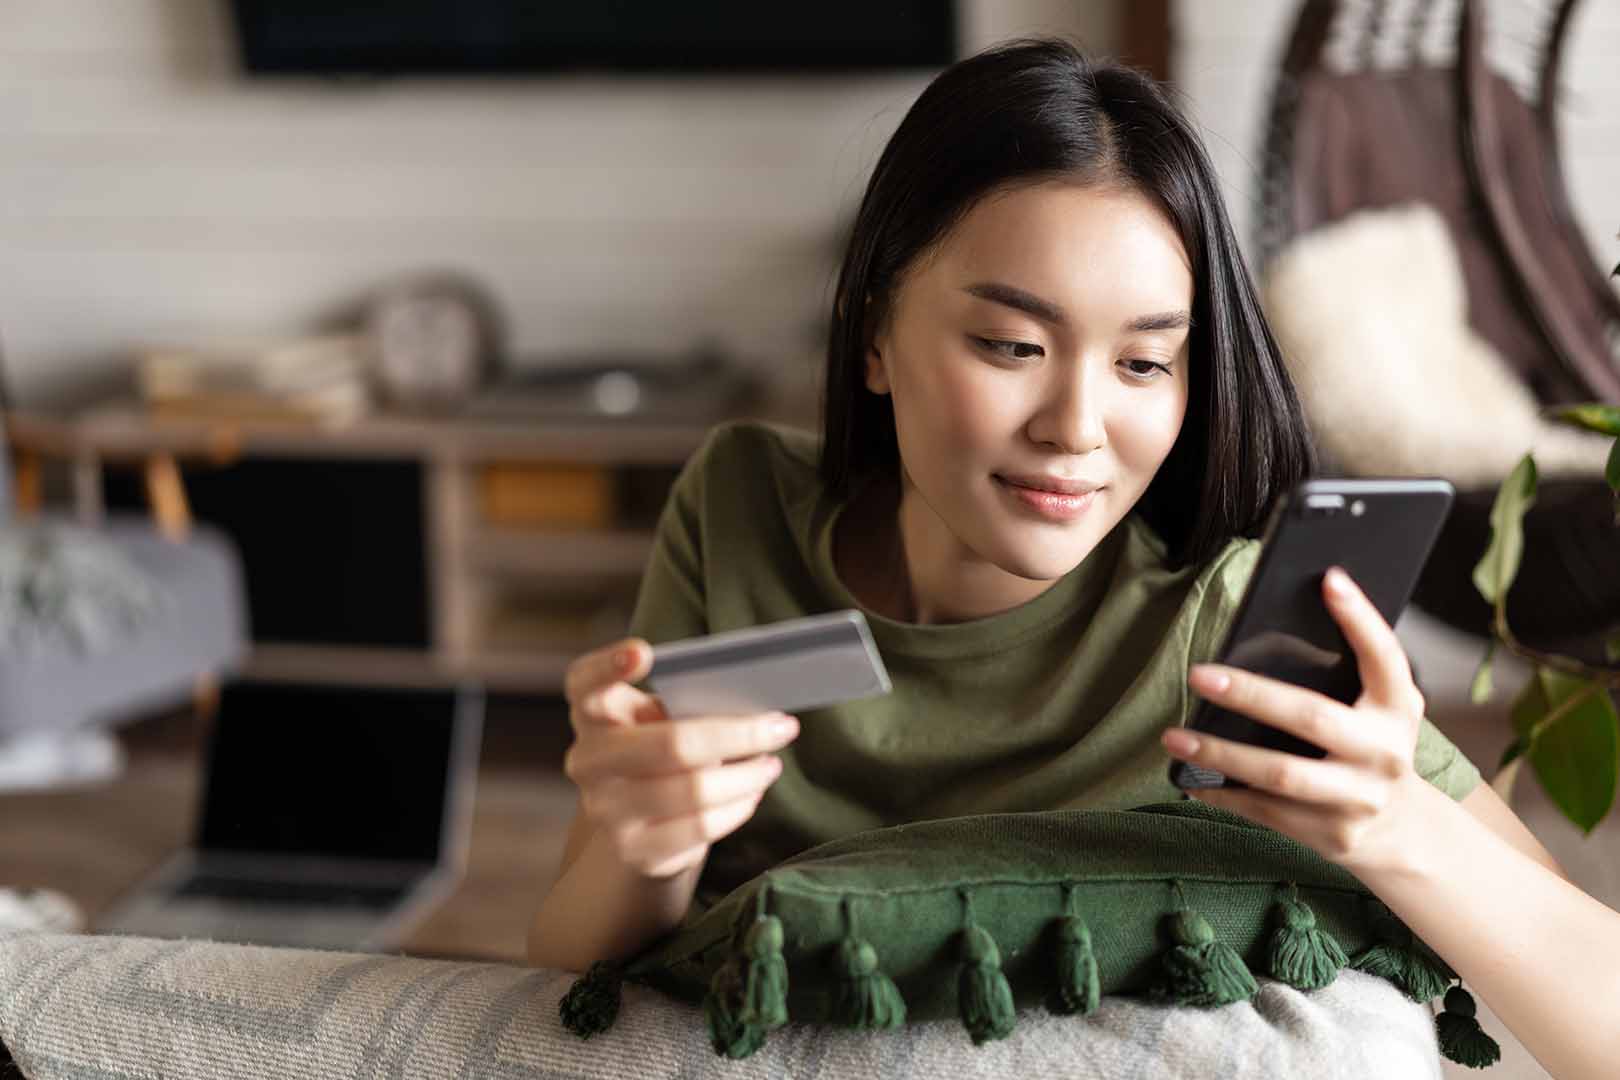 Young Asian woman making purchase on iPhone using credit card from home